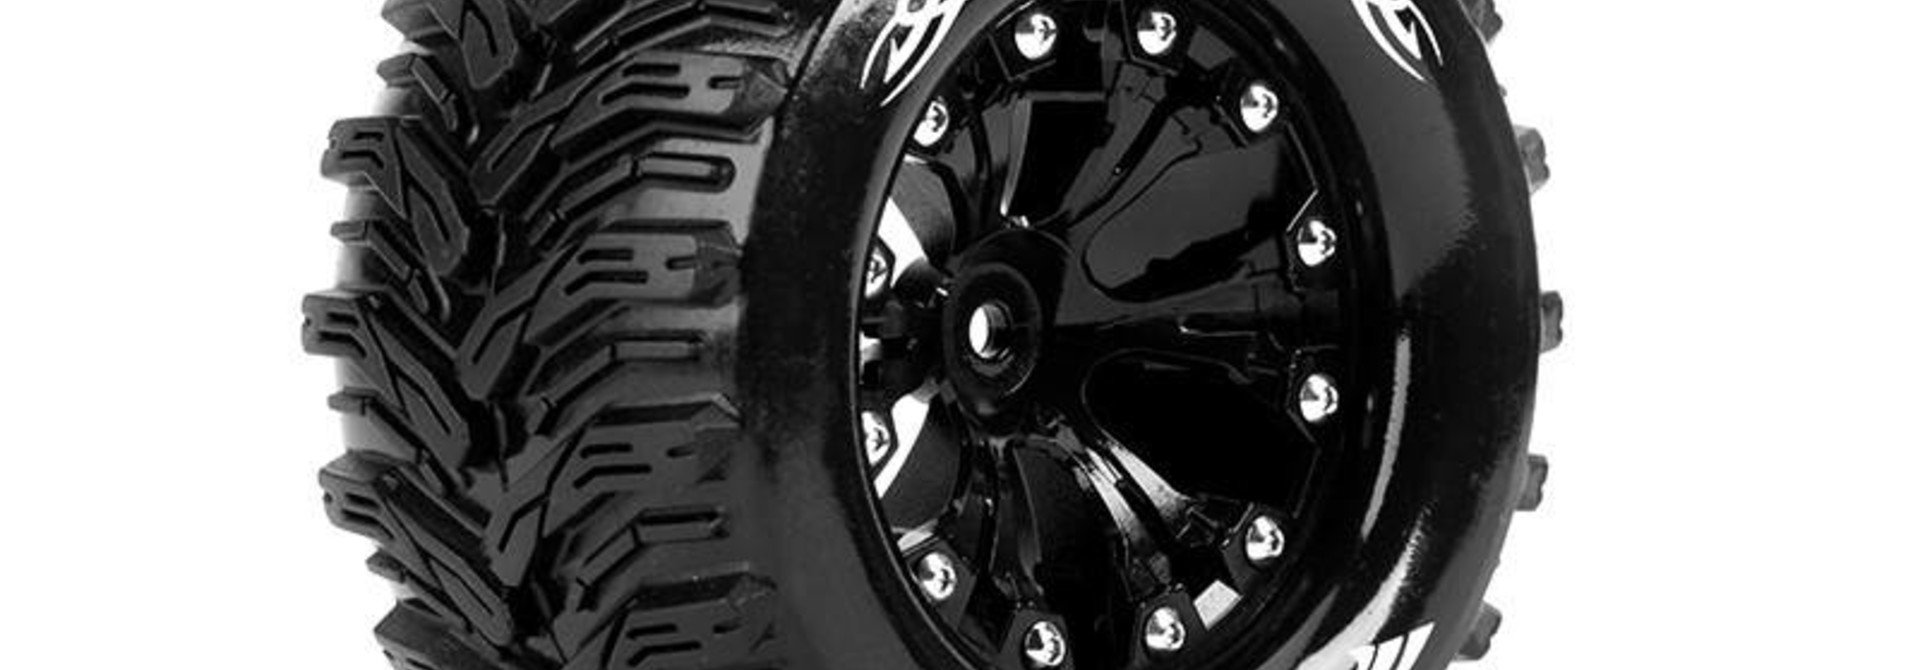 Louise RC - MT-CYCLONE - 1-10 Monster Truck Tire Set - Mounted - Soft - Black 2.8 Rims - Hex 14mm - L-T3226SBM